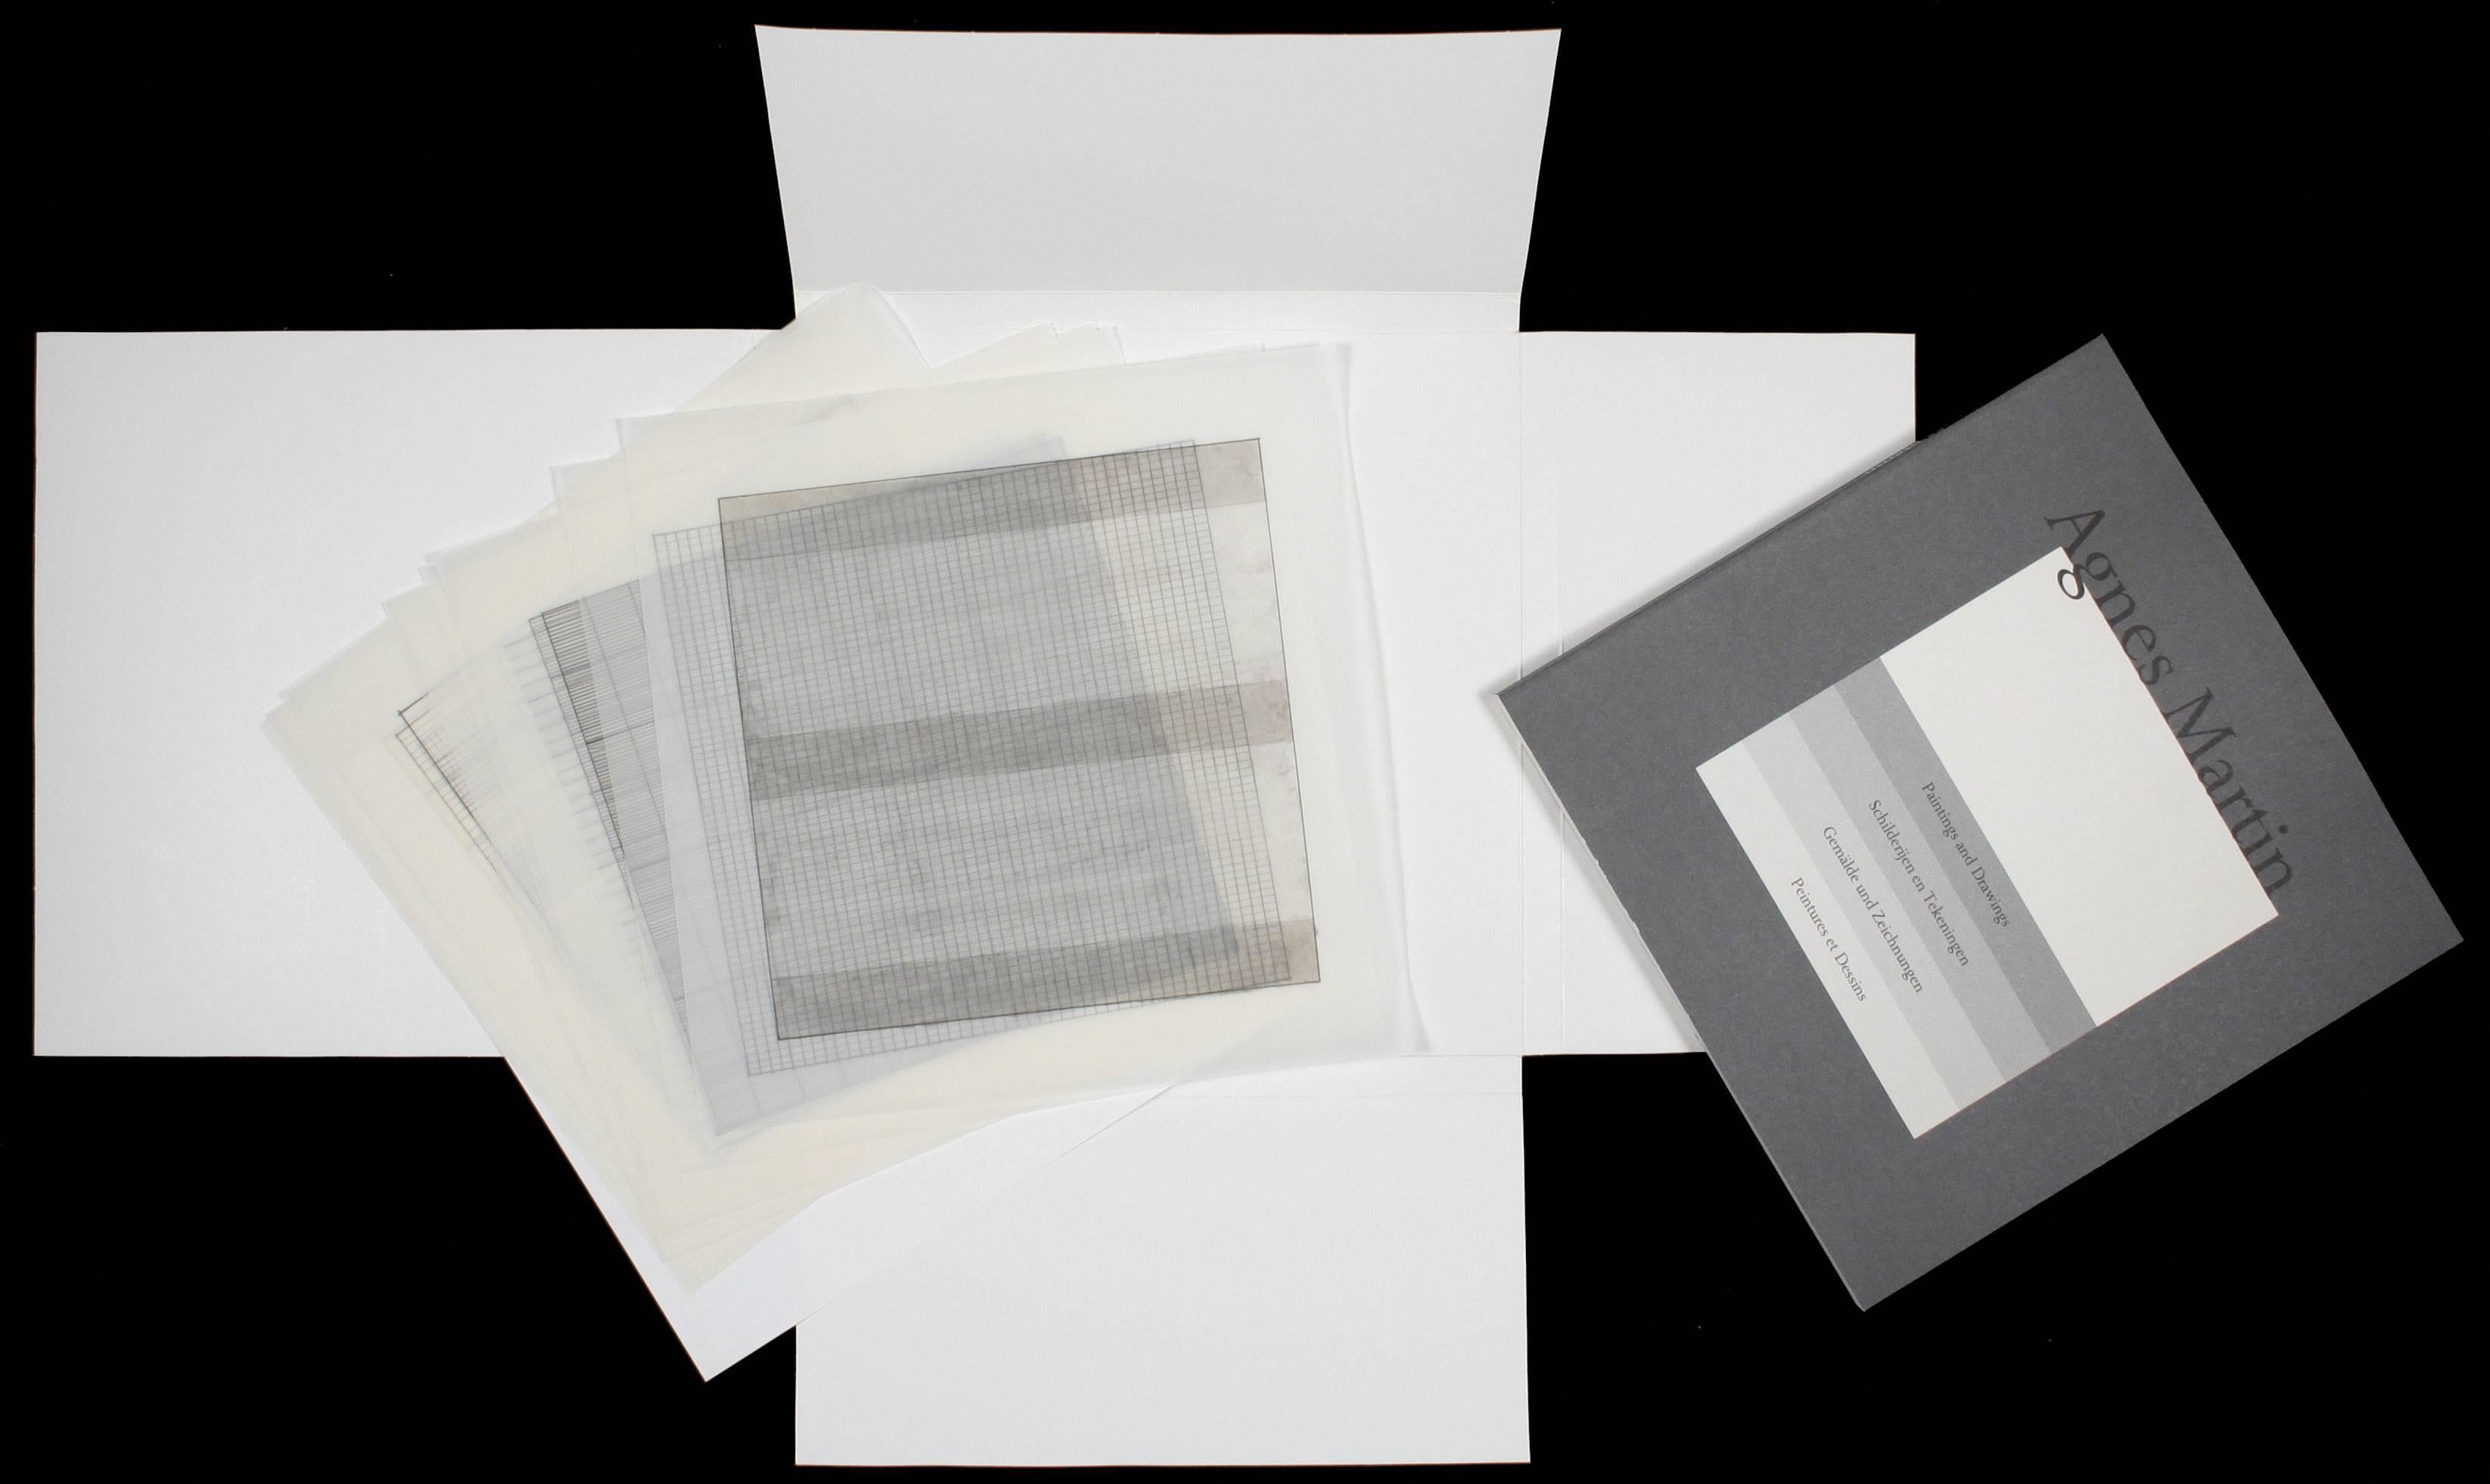 AGNES MARTIN. Paintings and Drawings 1974-1990 - Art by Agnes Martin